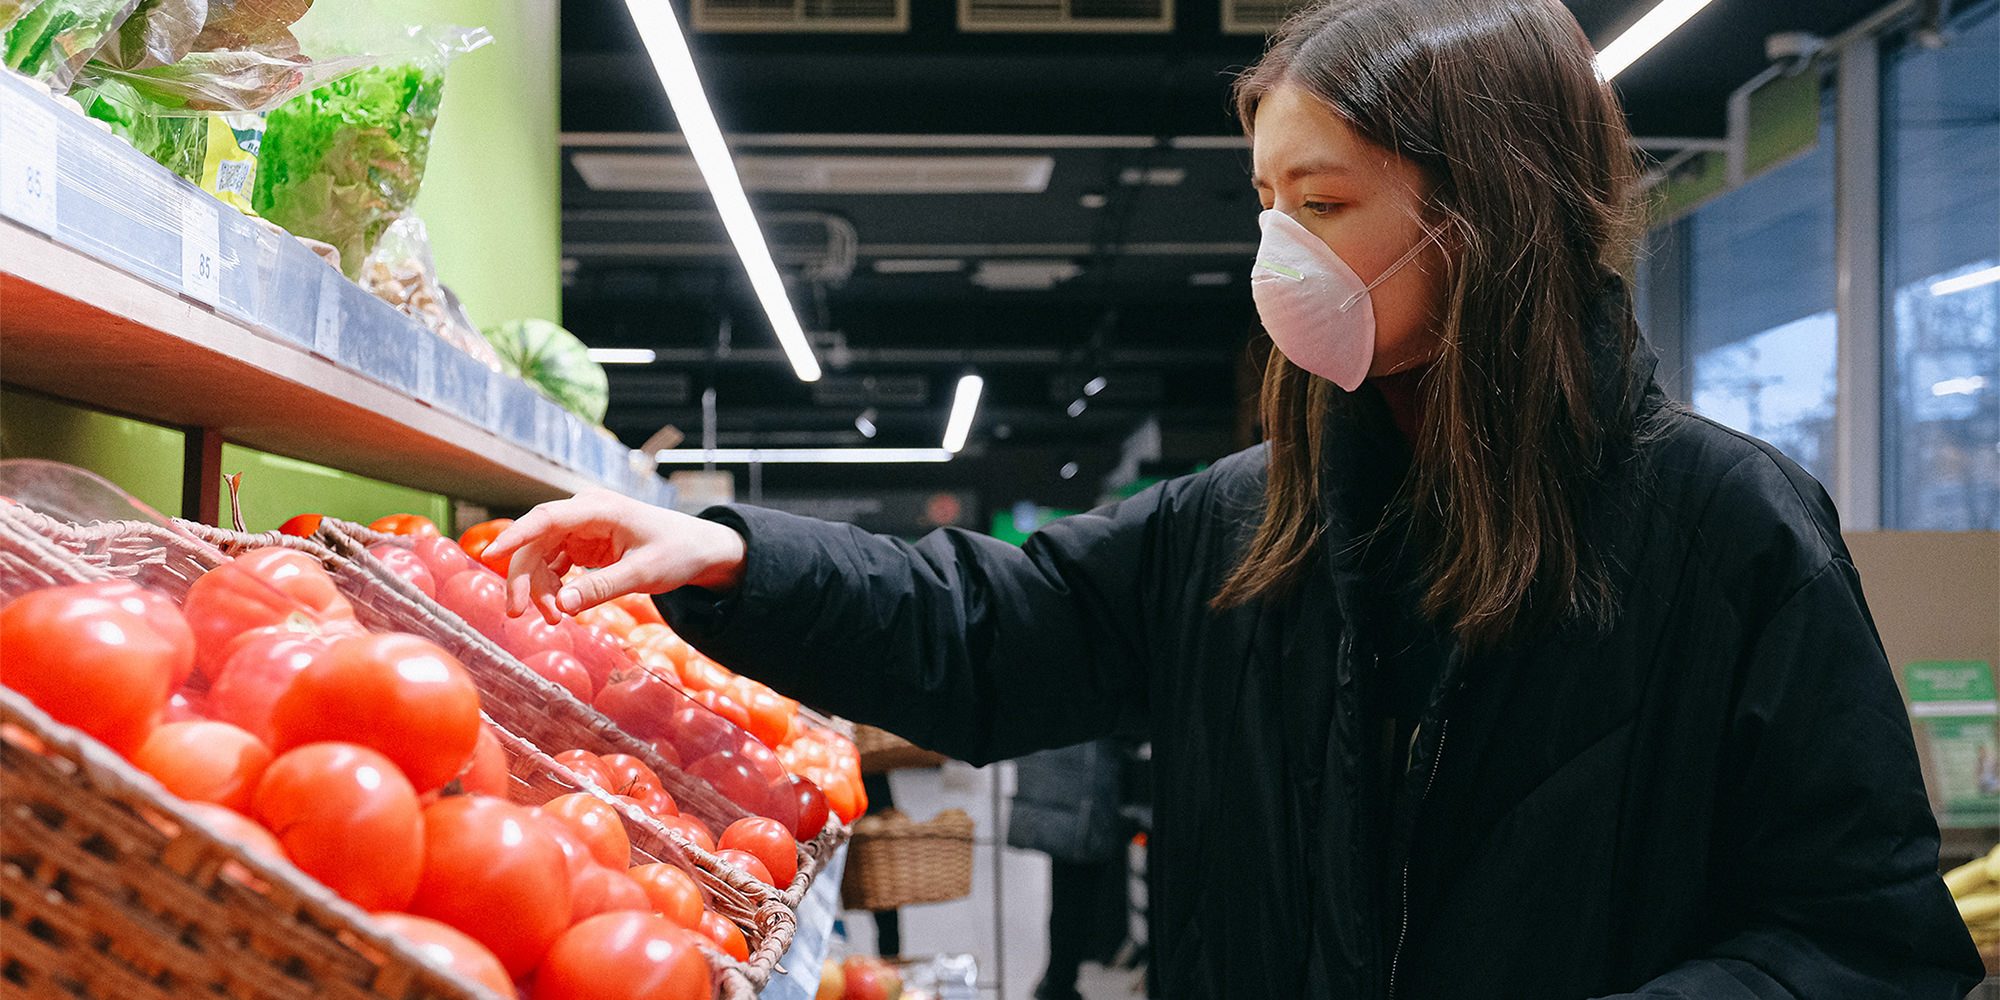 A woman in at the grocery store wearing a face mask. She's reaching towards a basket of tomatoes.